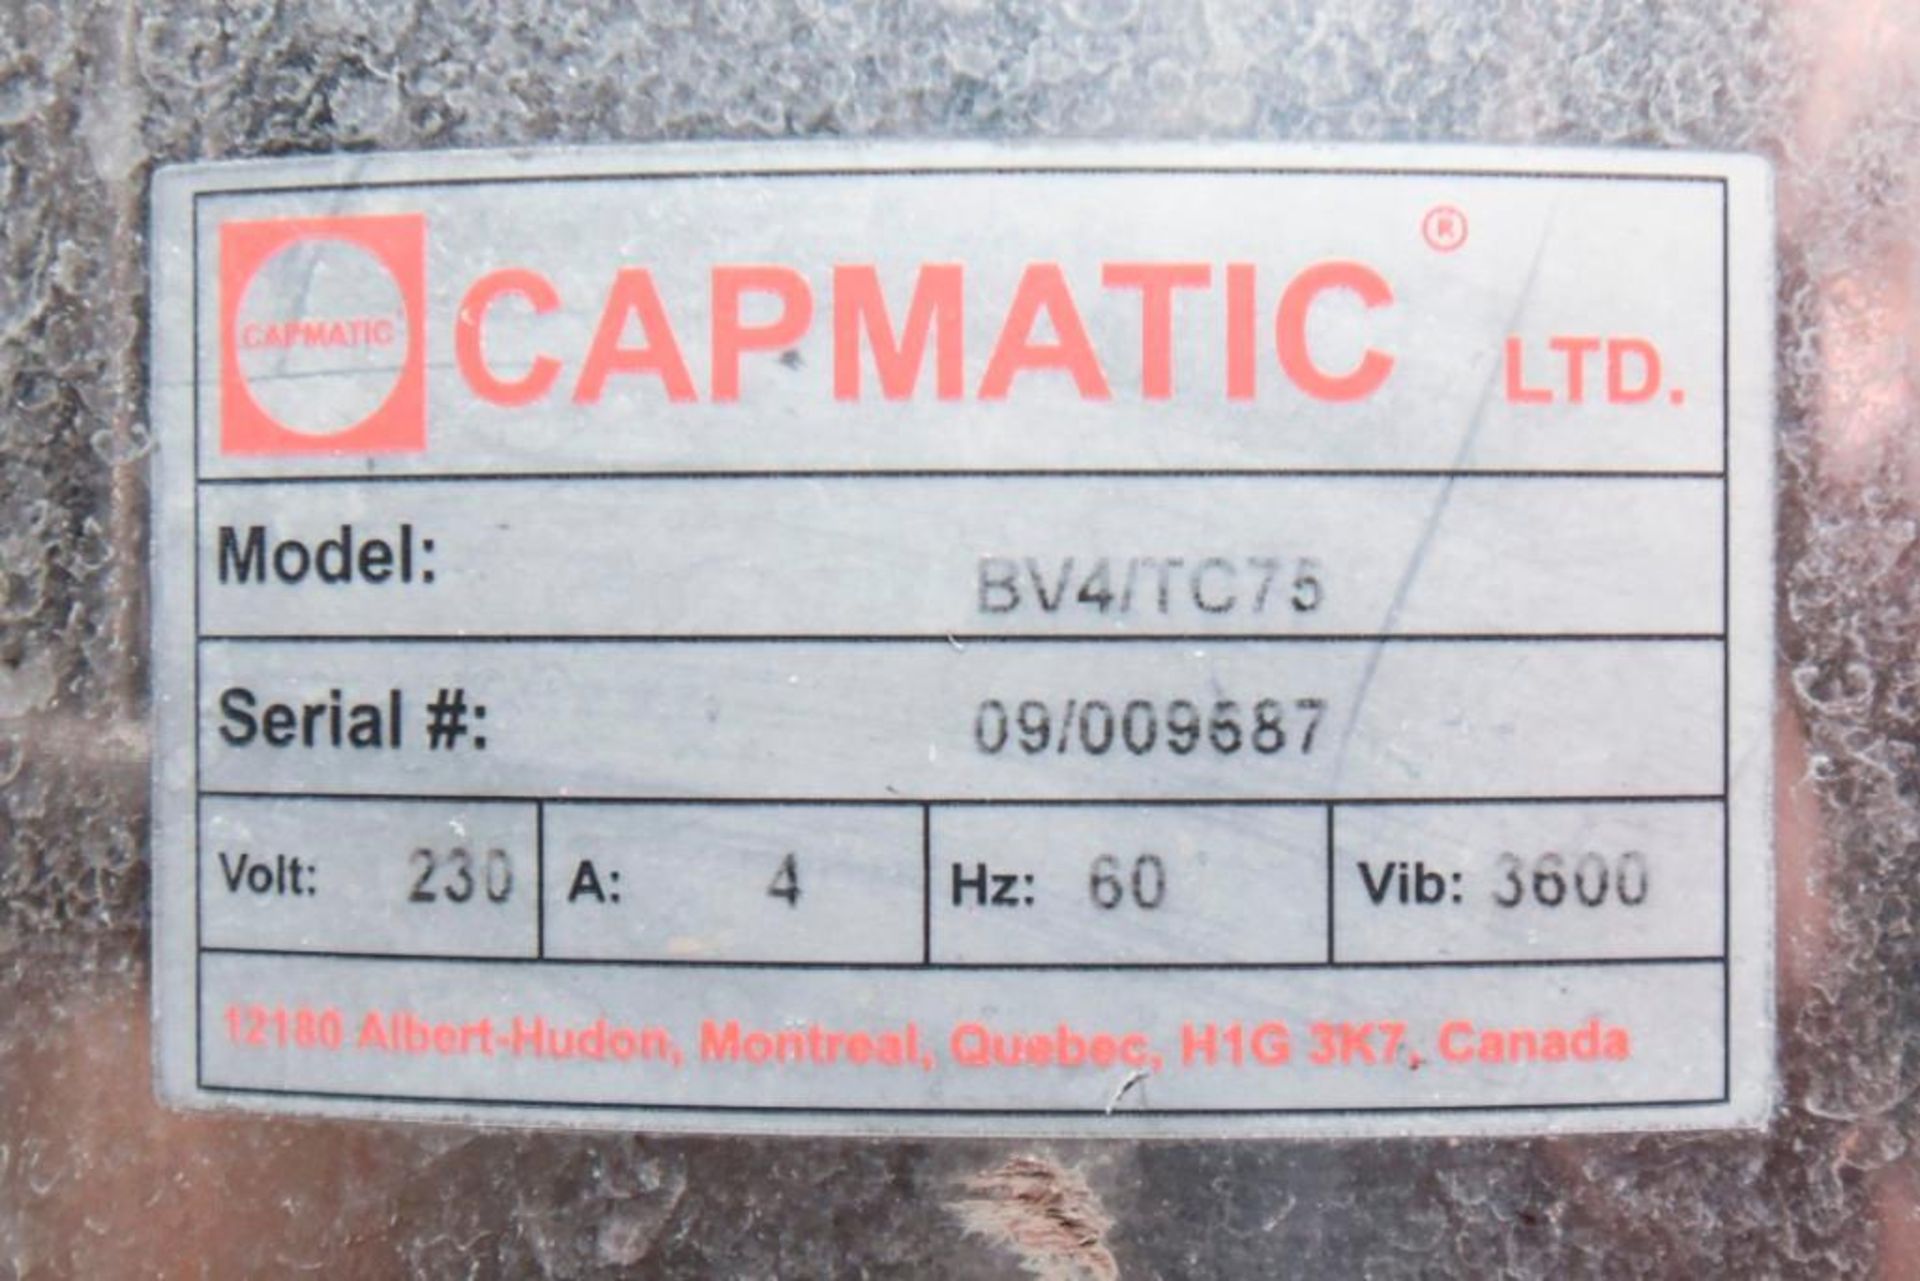 Capmatic Intrepid Rotary Double Index with Change Parts - Image 24 of 44